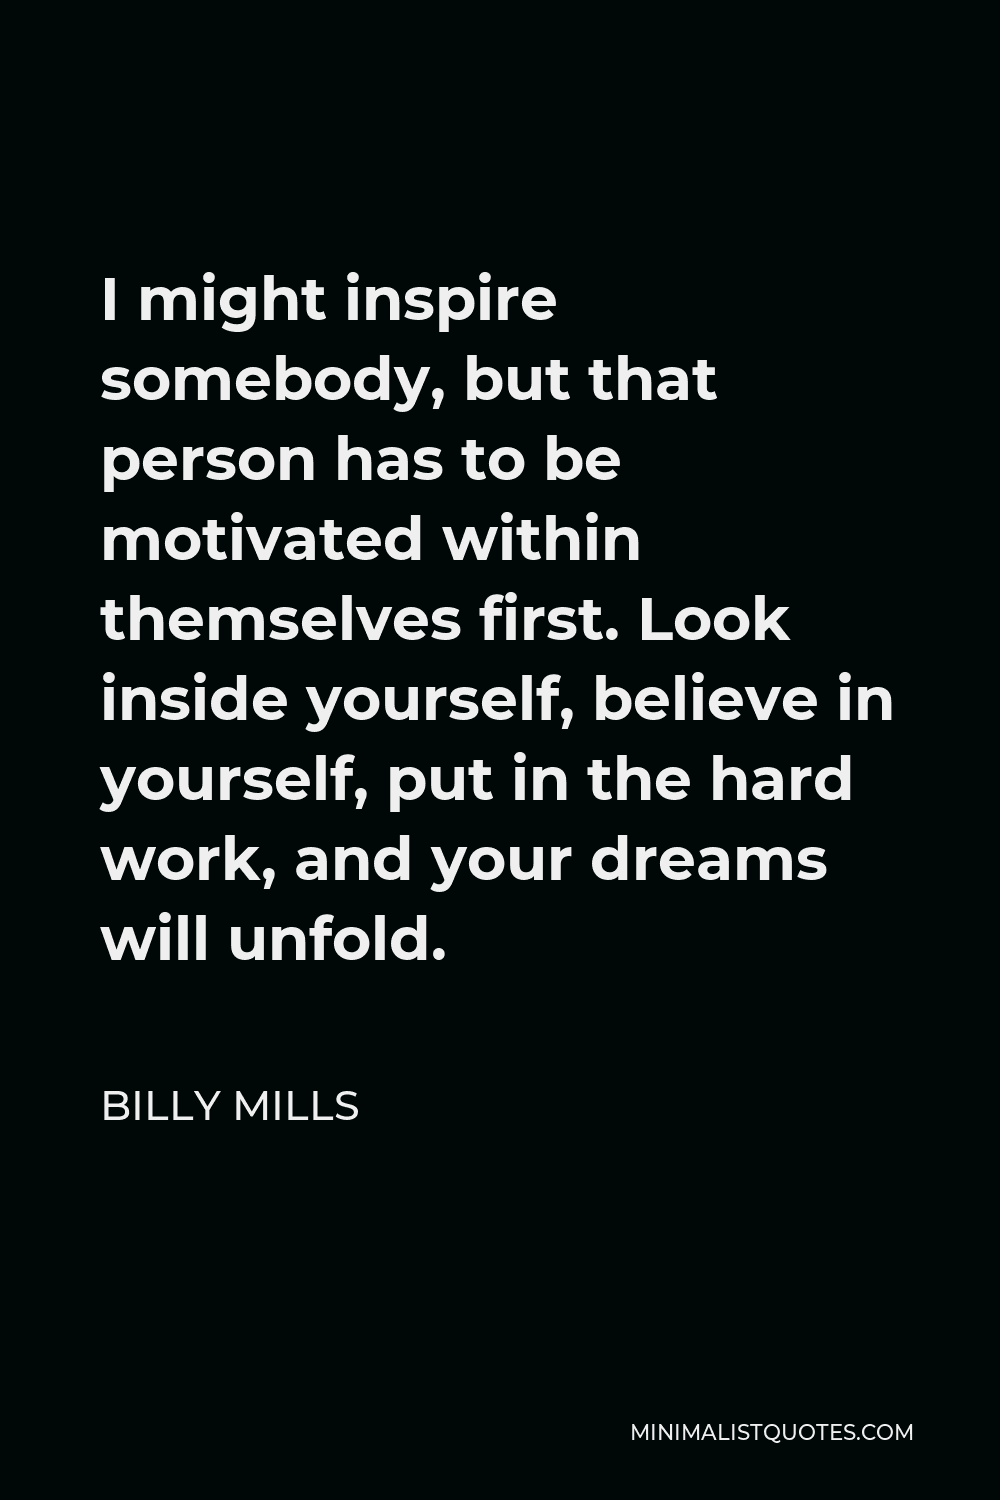 Billy Mills Quote - I might inspire somebody, but that person has to be motivated within themselves first. Look inside yourself, believe in yourself, put in the hard work, and your dreams will unfold.